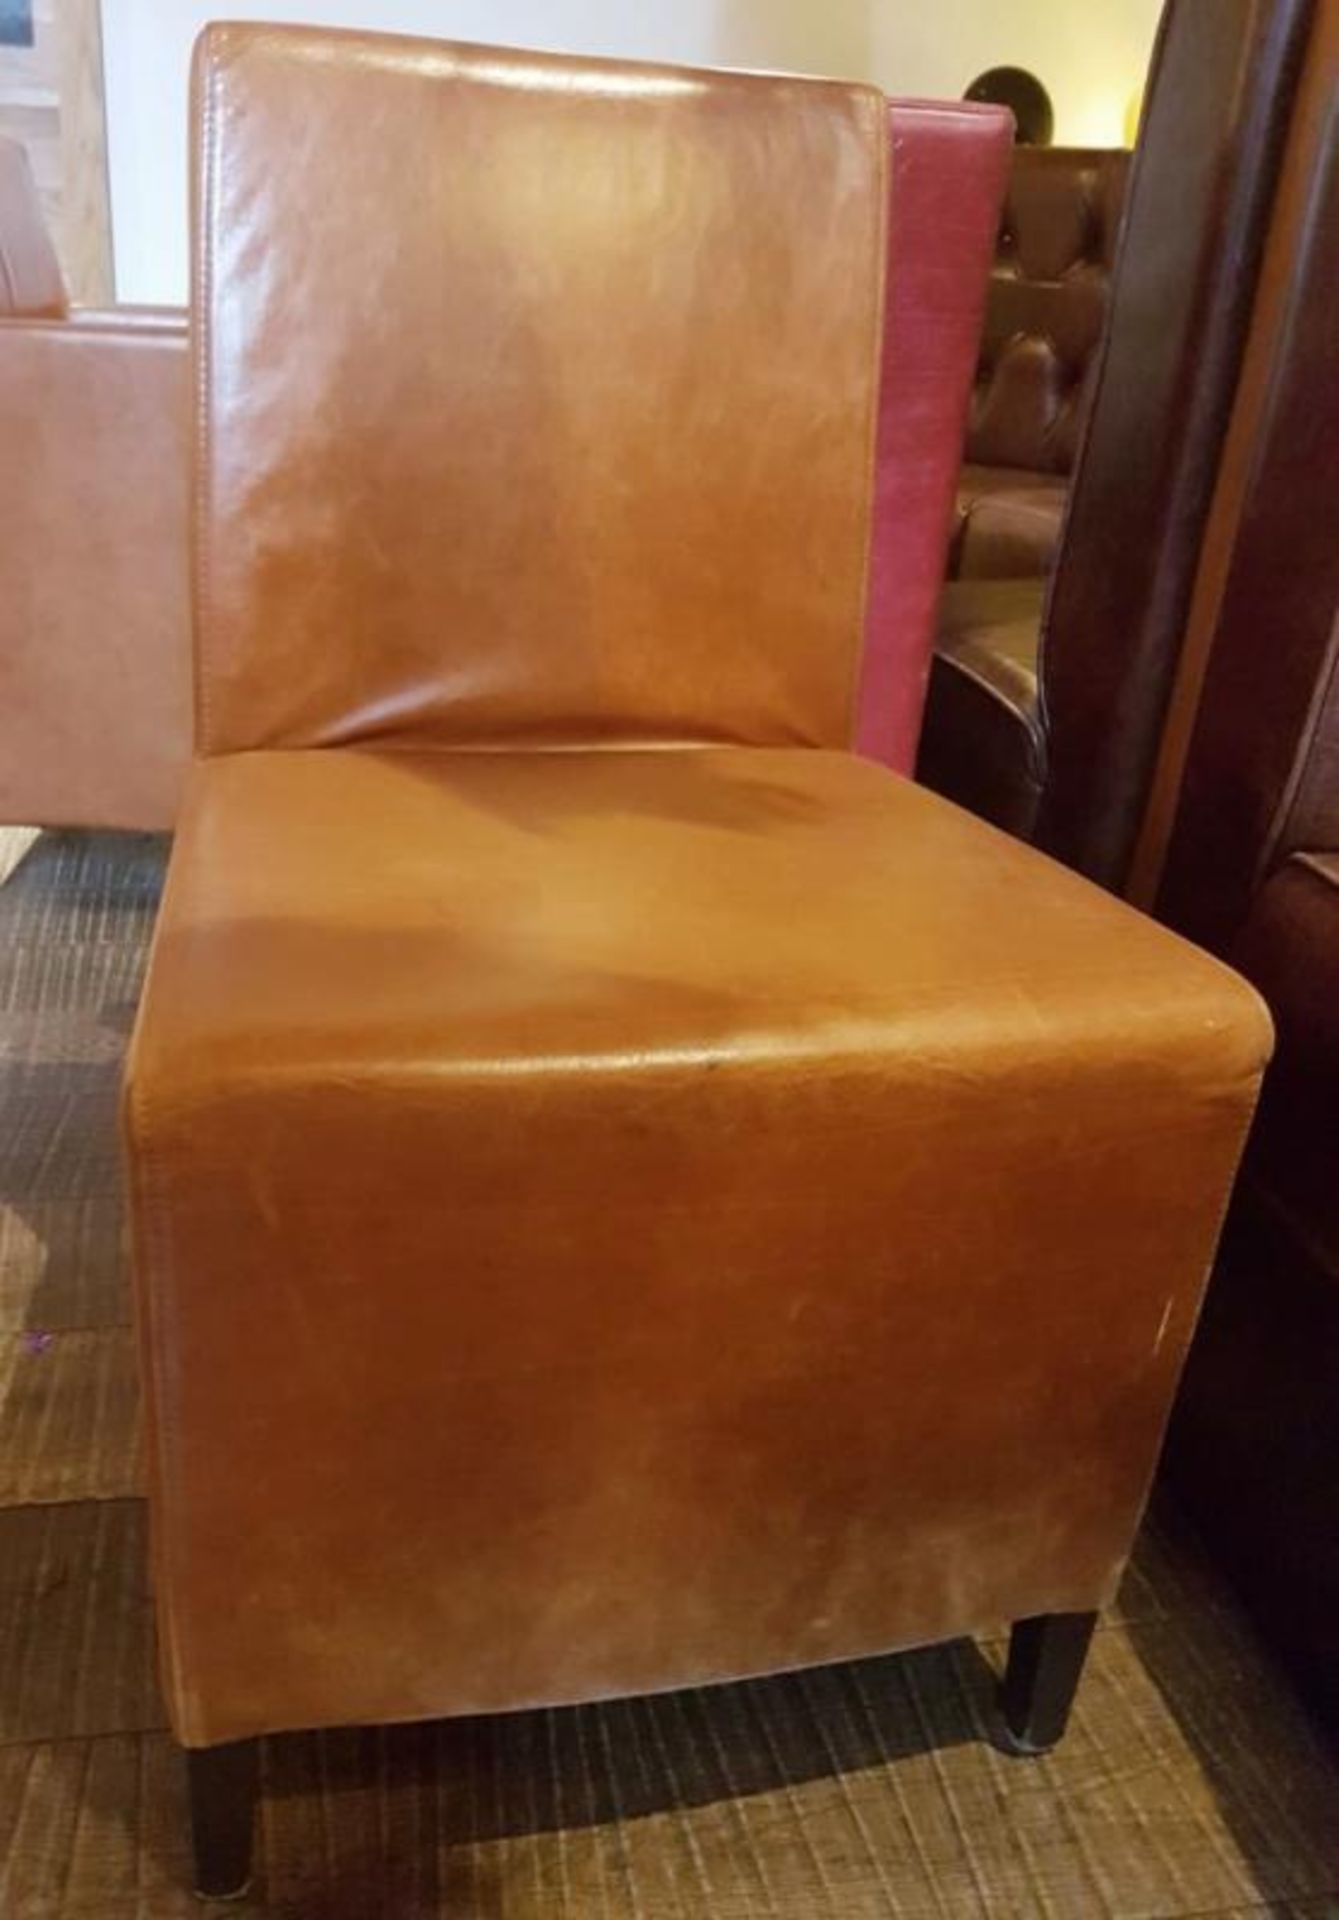 4 x Leather Upholstered Chairs In Tan - Recently Removed From A City Centre Steakhouse Restaurant - - Image 2 of 6